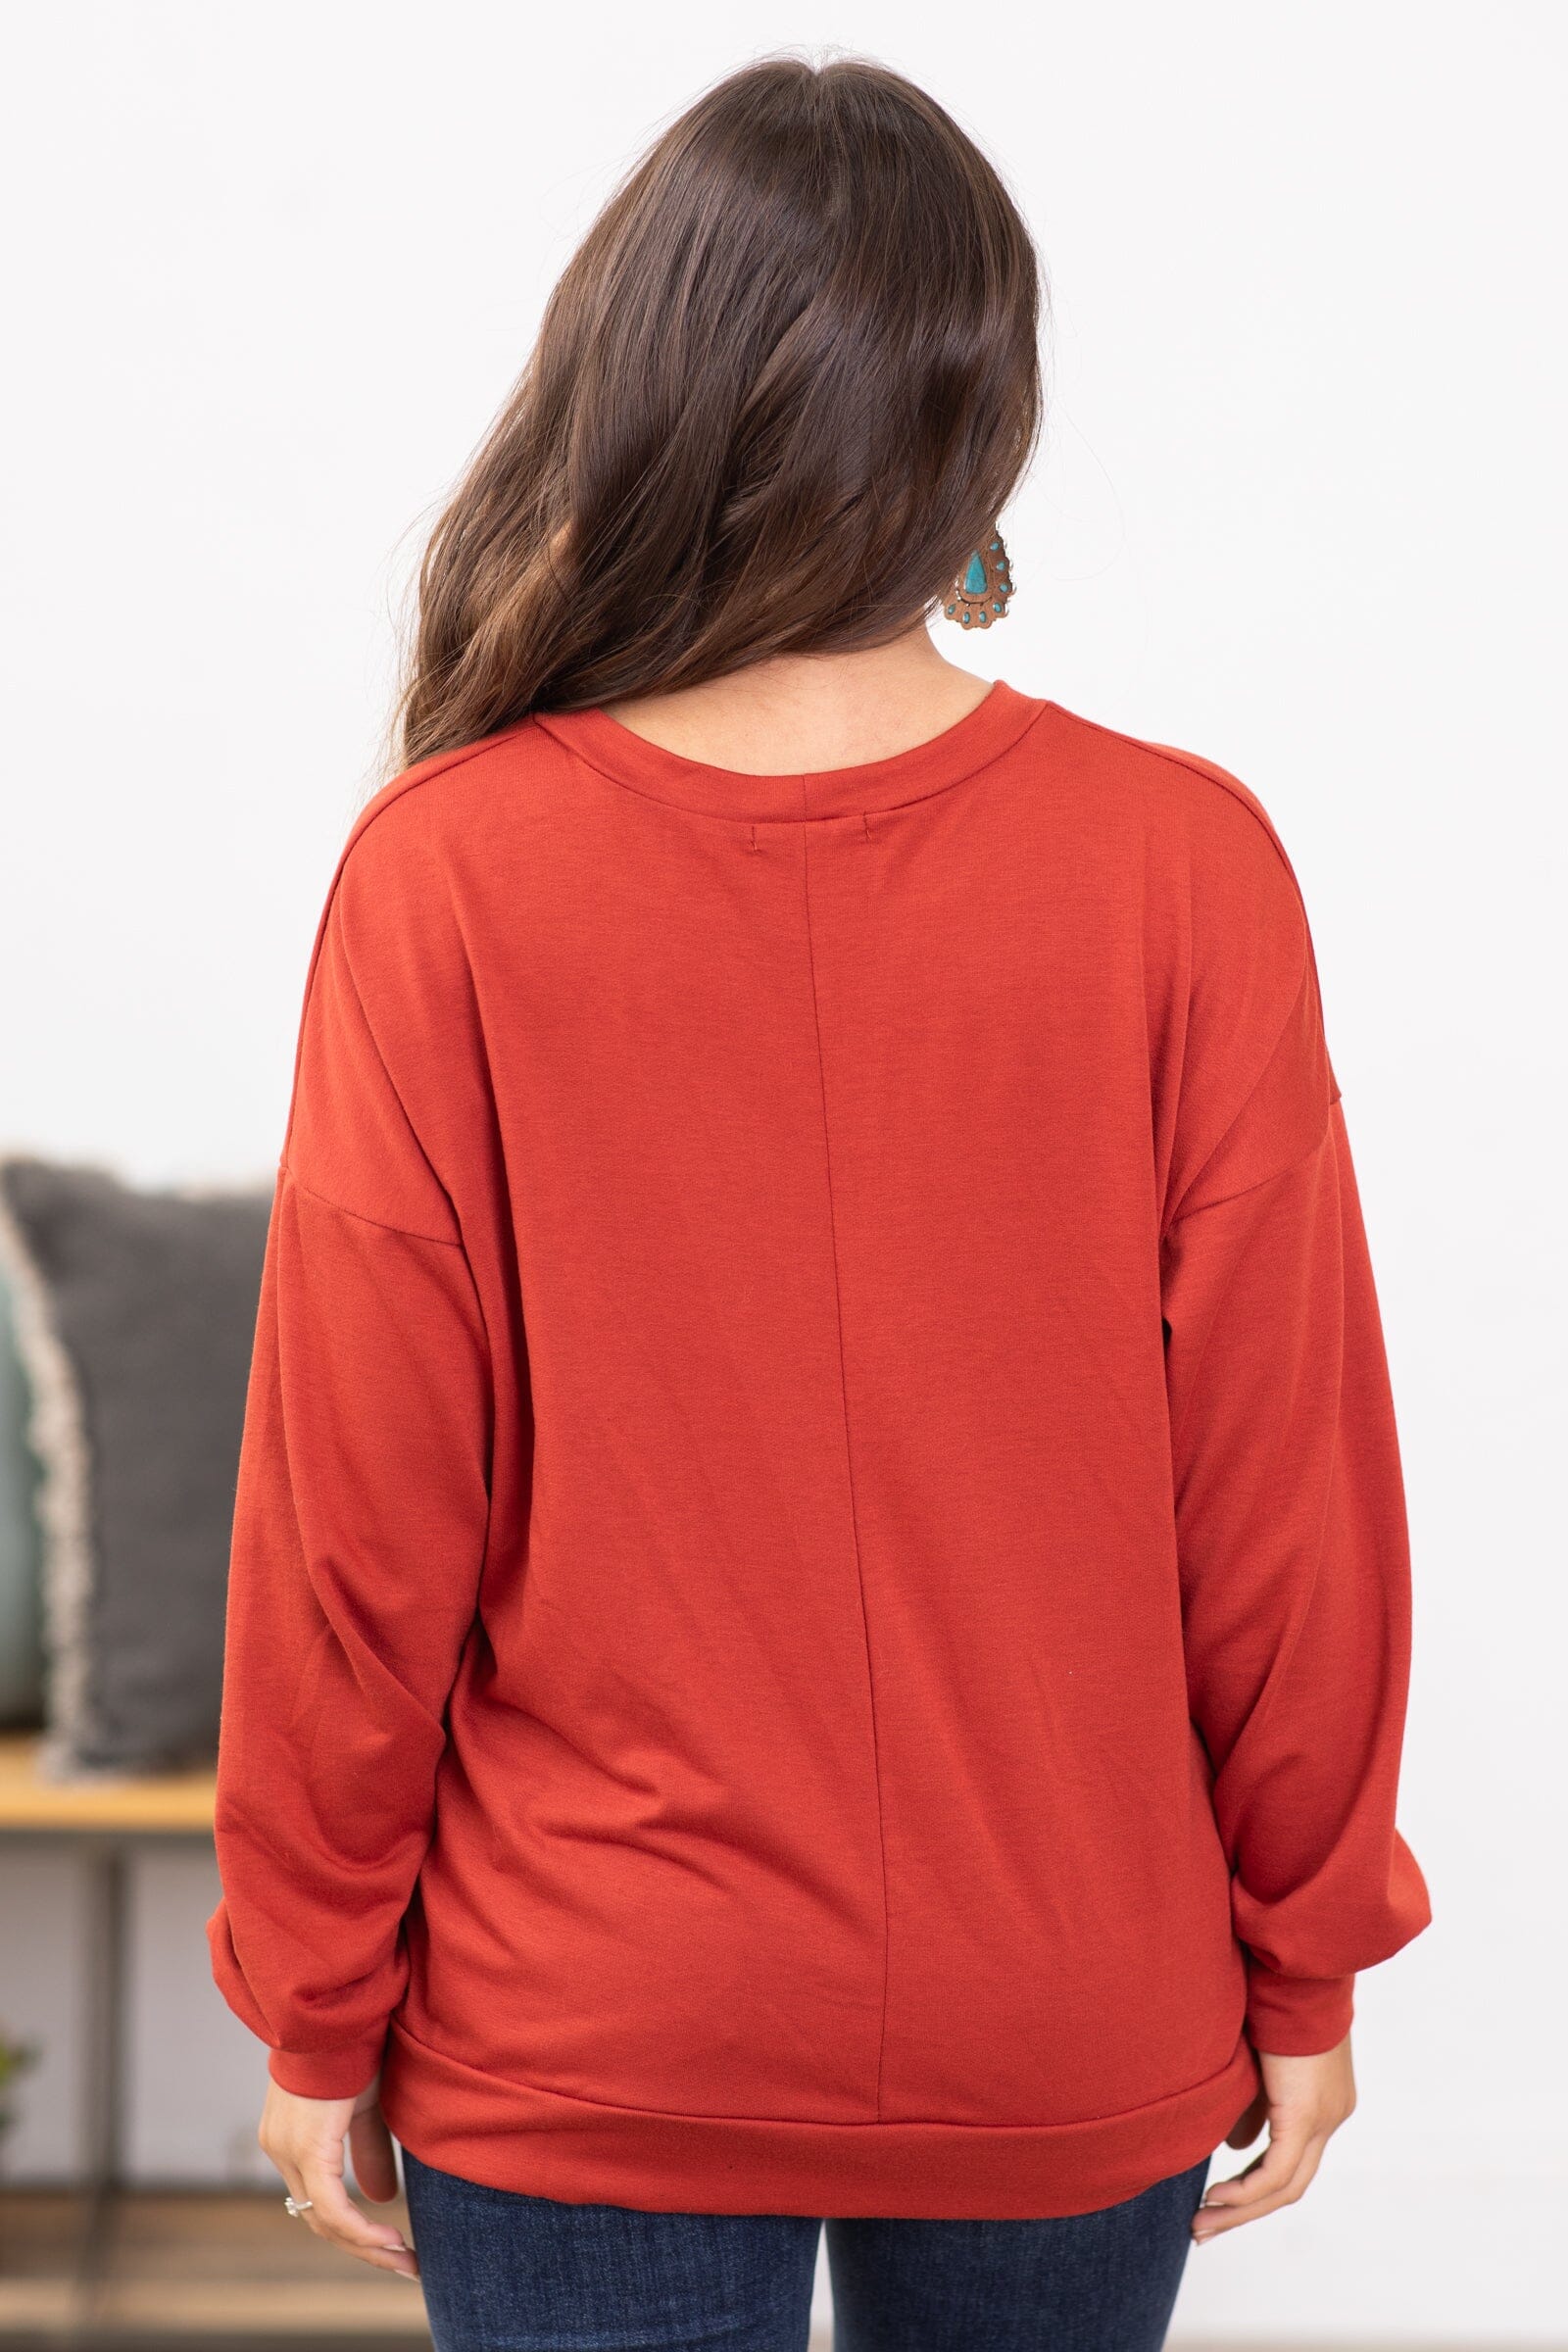 Cranberry Crew Neck Long Sleeve Top - Filly Flair